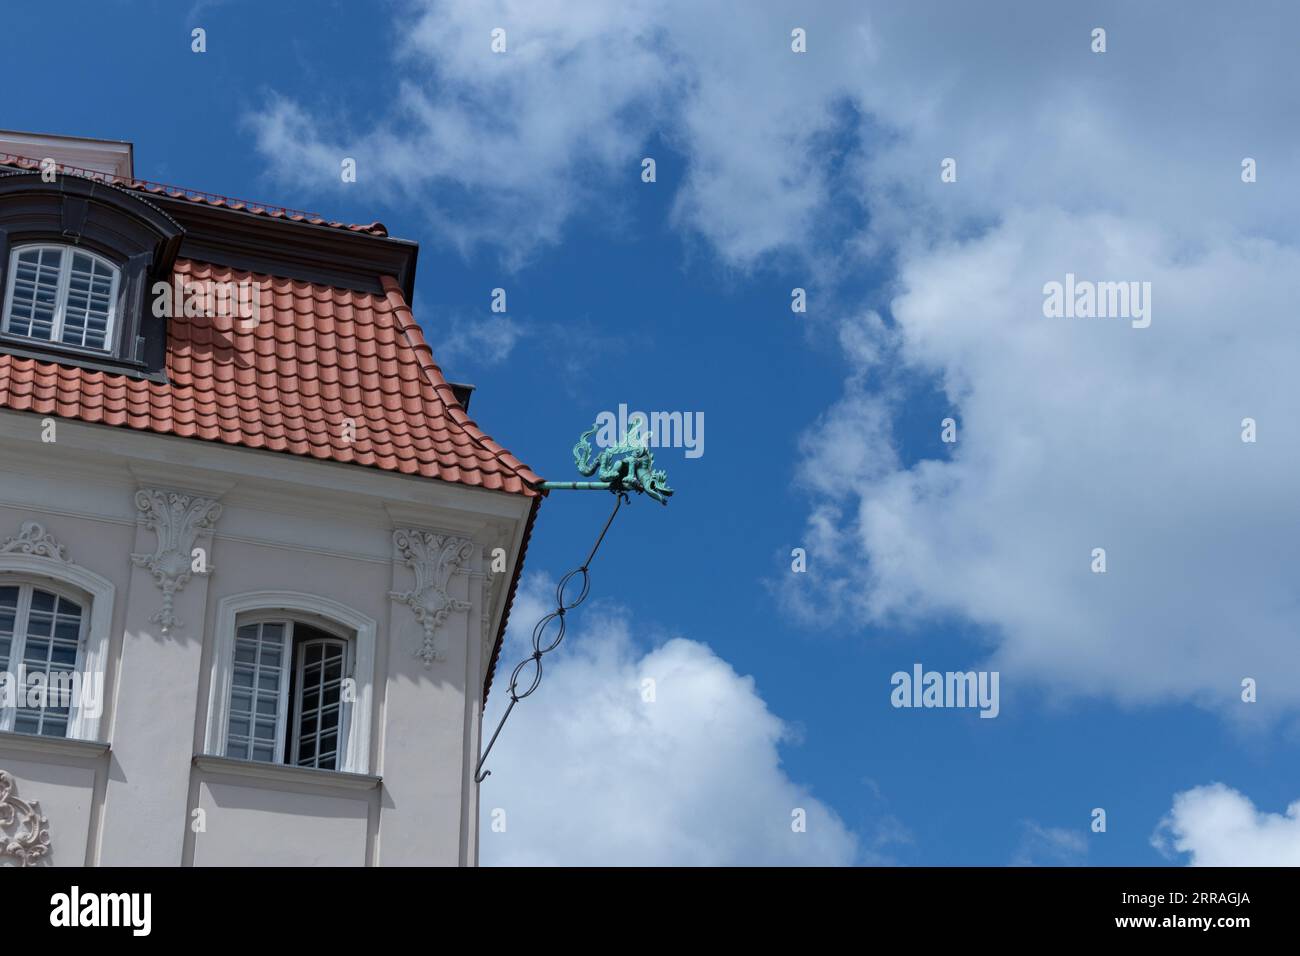 Guttering shaped like a dragon on a building in Plac Zamkowy, Old Town, Warsaw, Poland Stock Photo